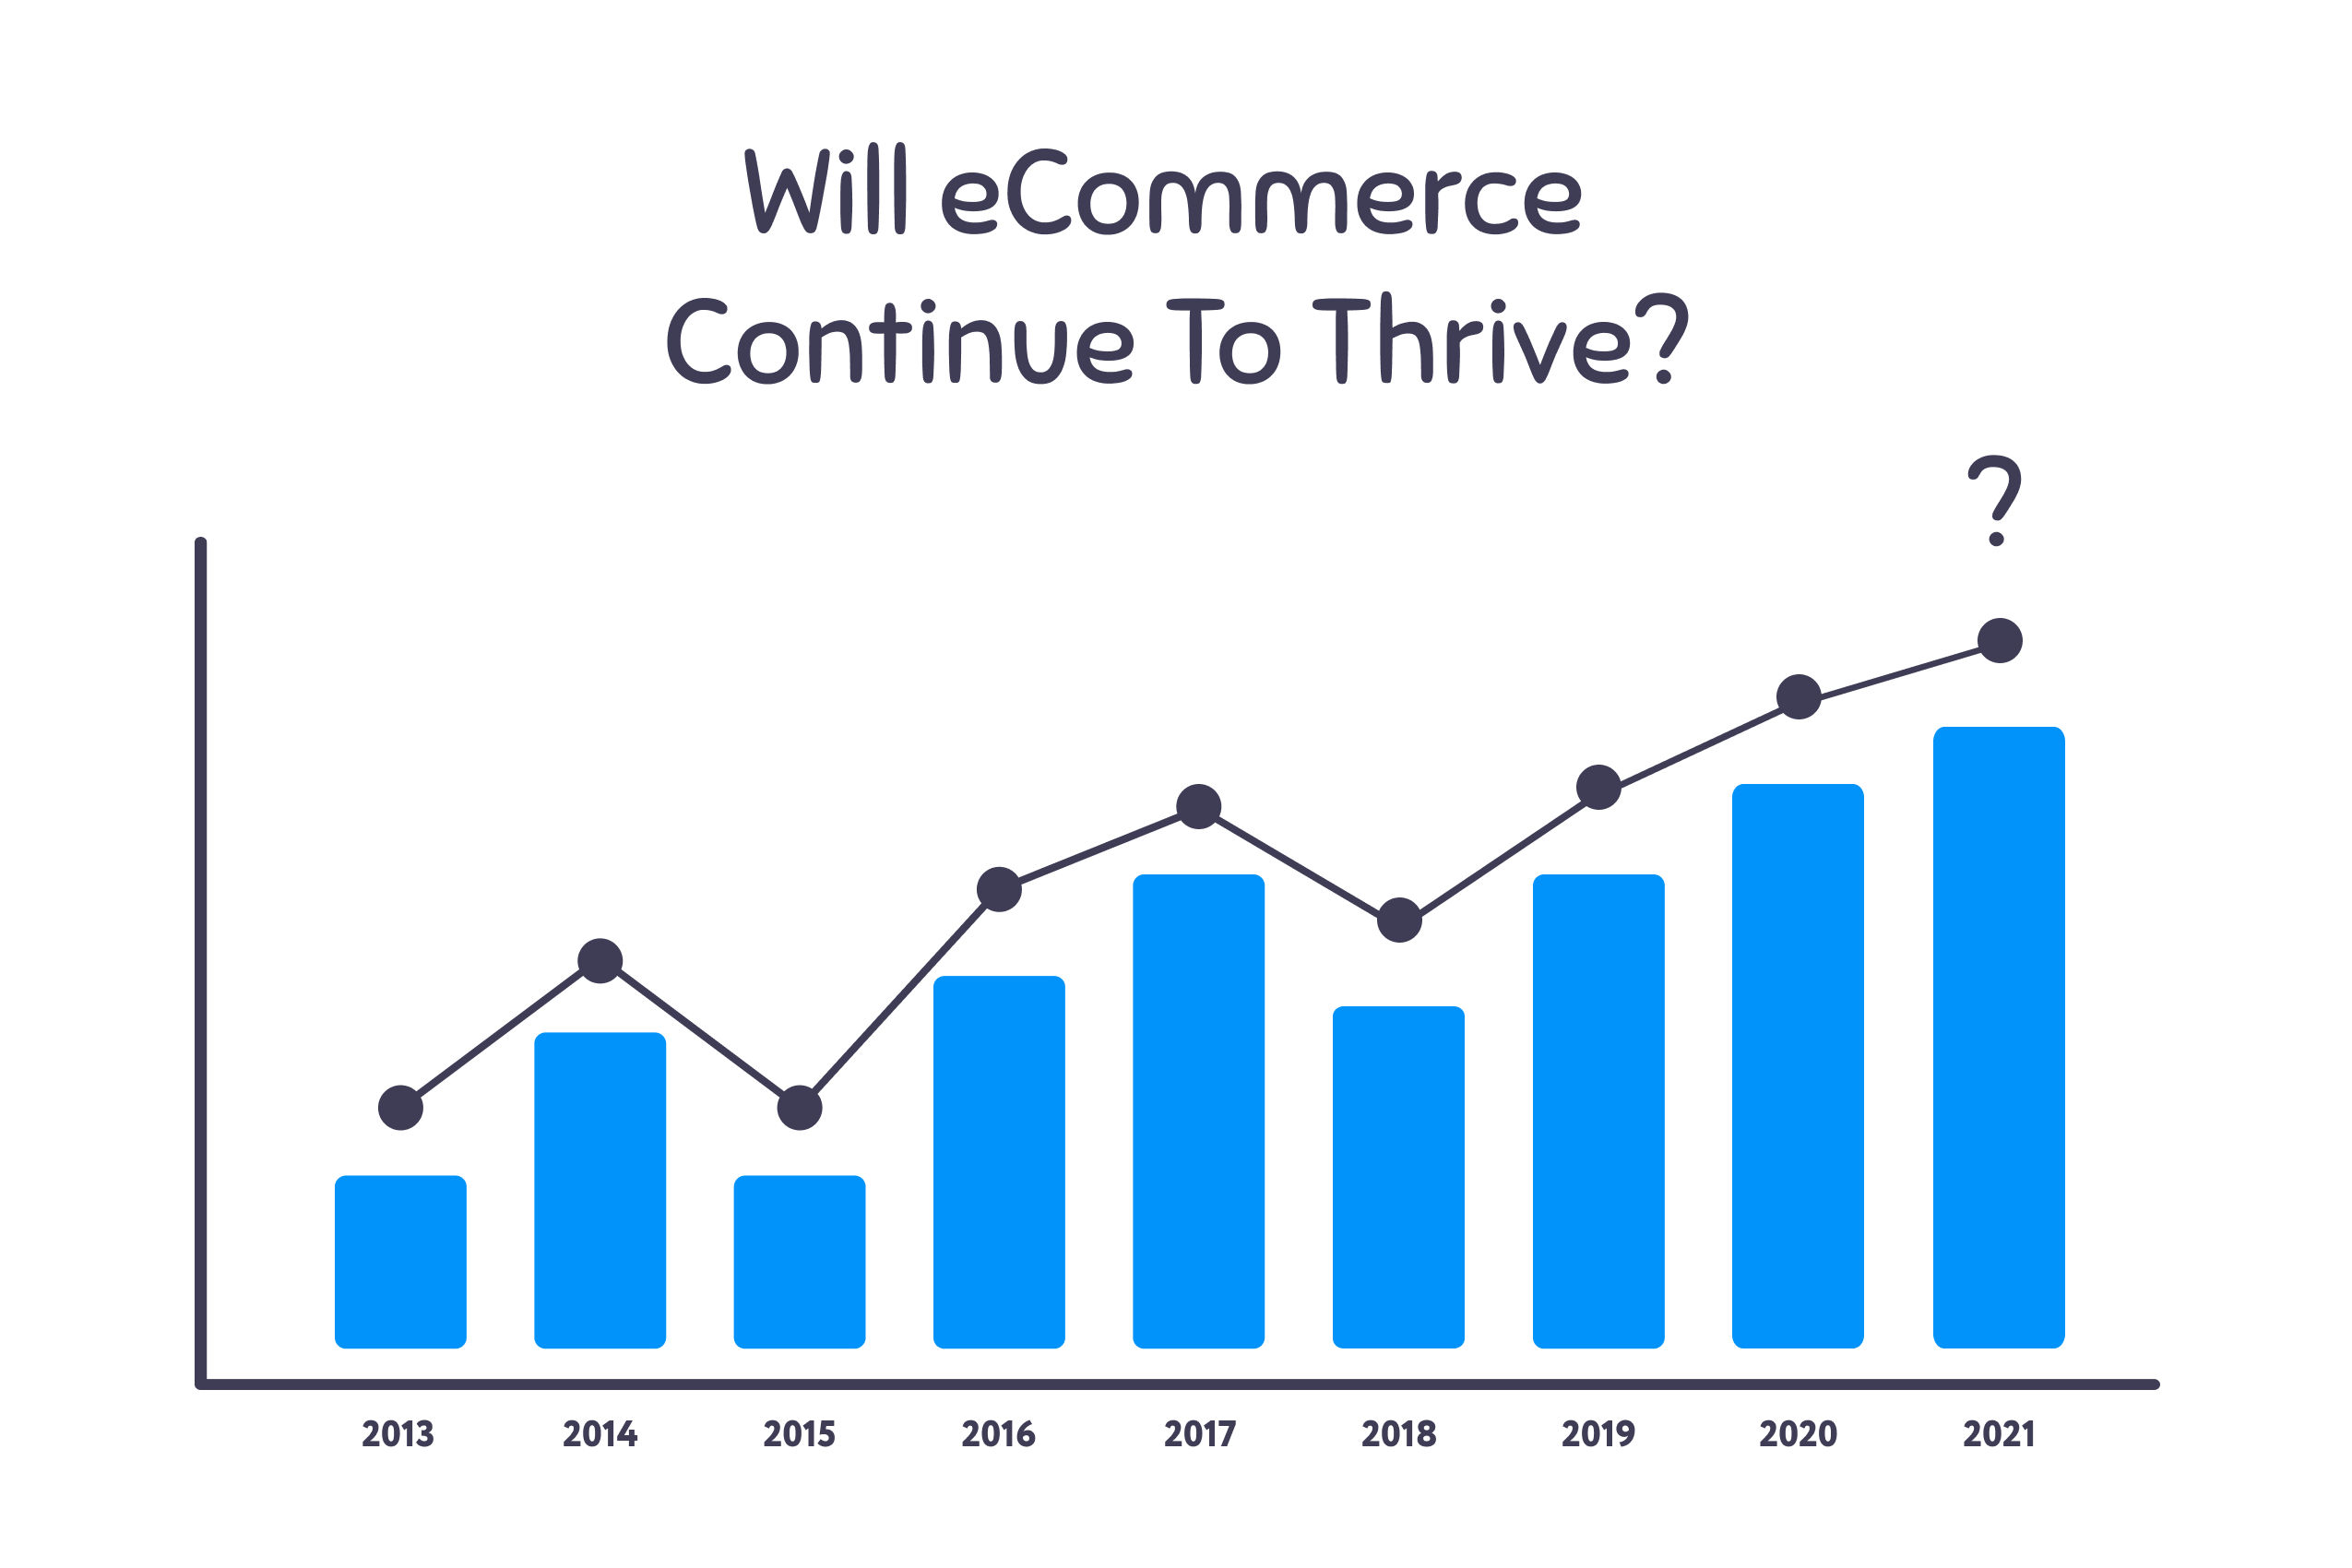 Throughout 2021 and Beyond Will eCommerce Continue To Thrive?